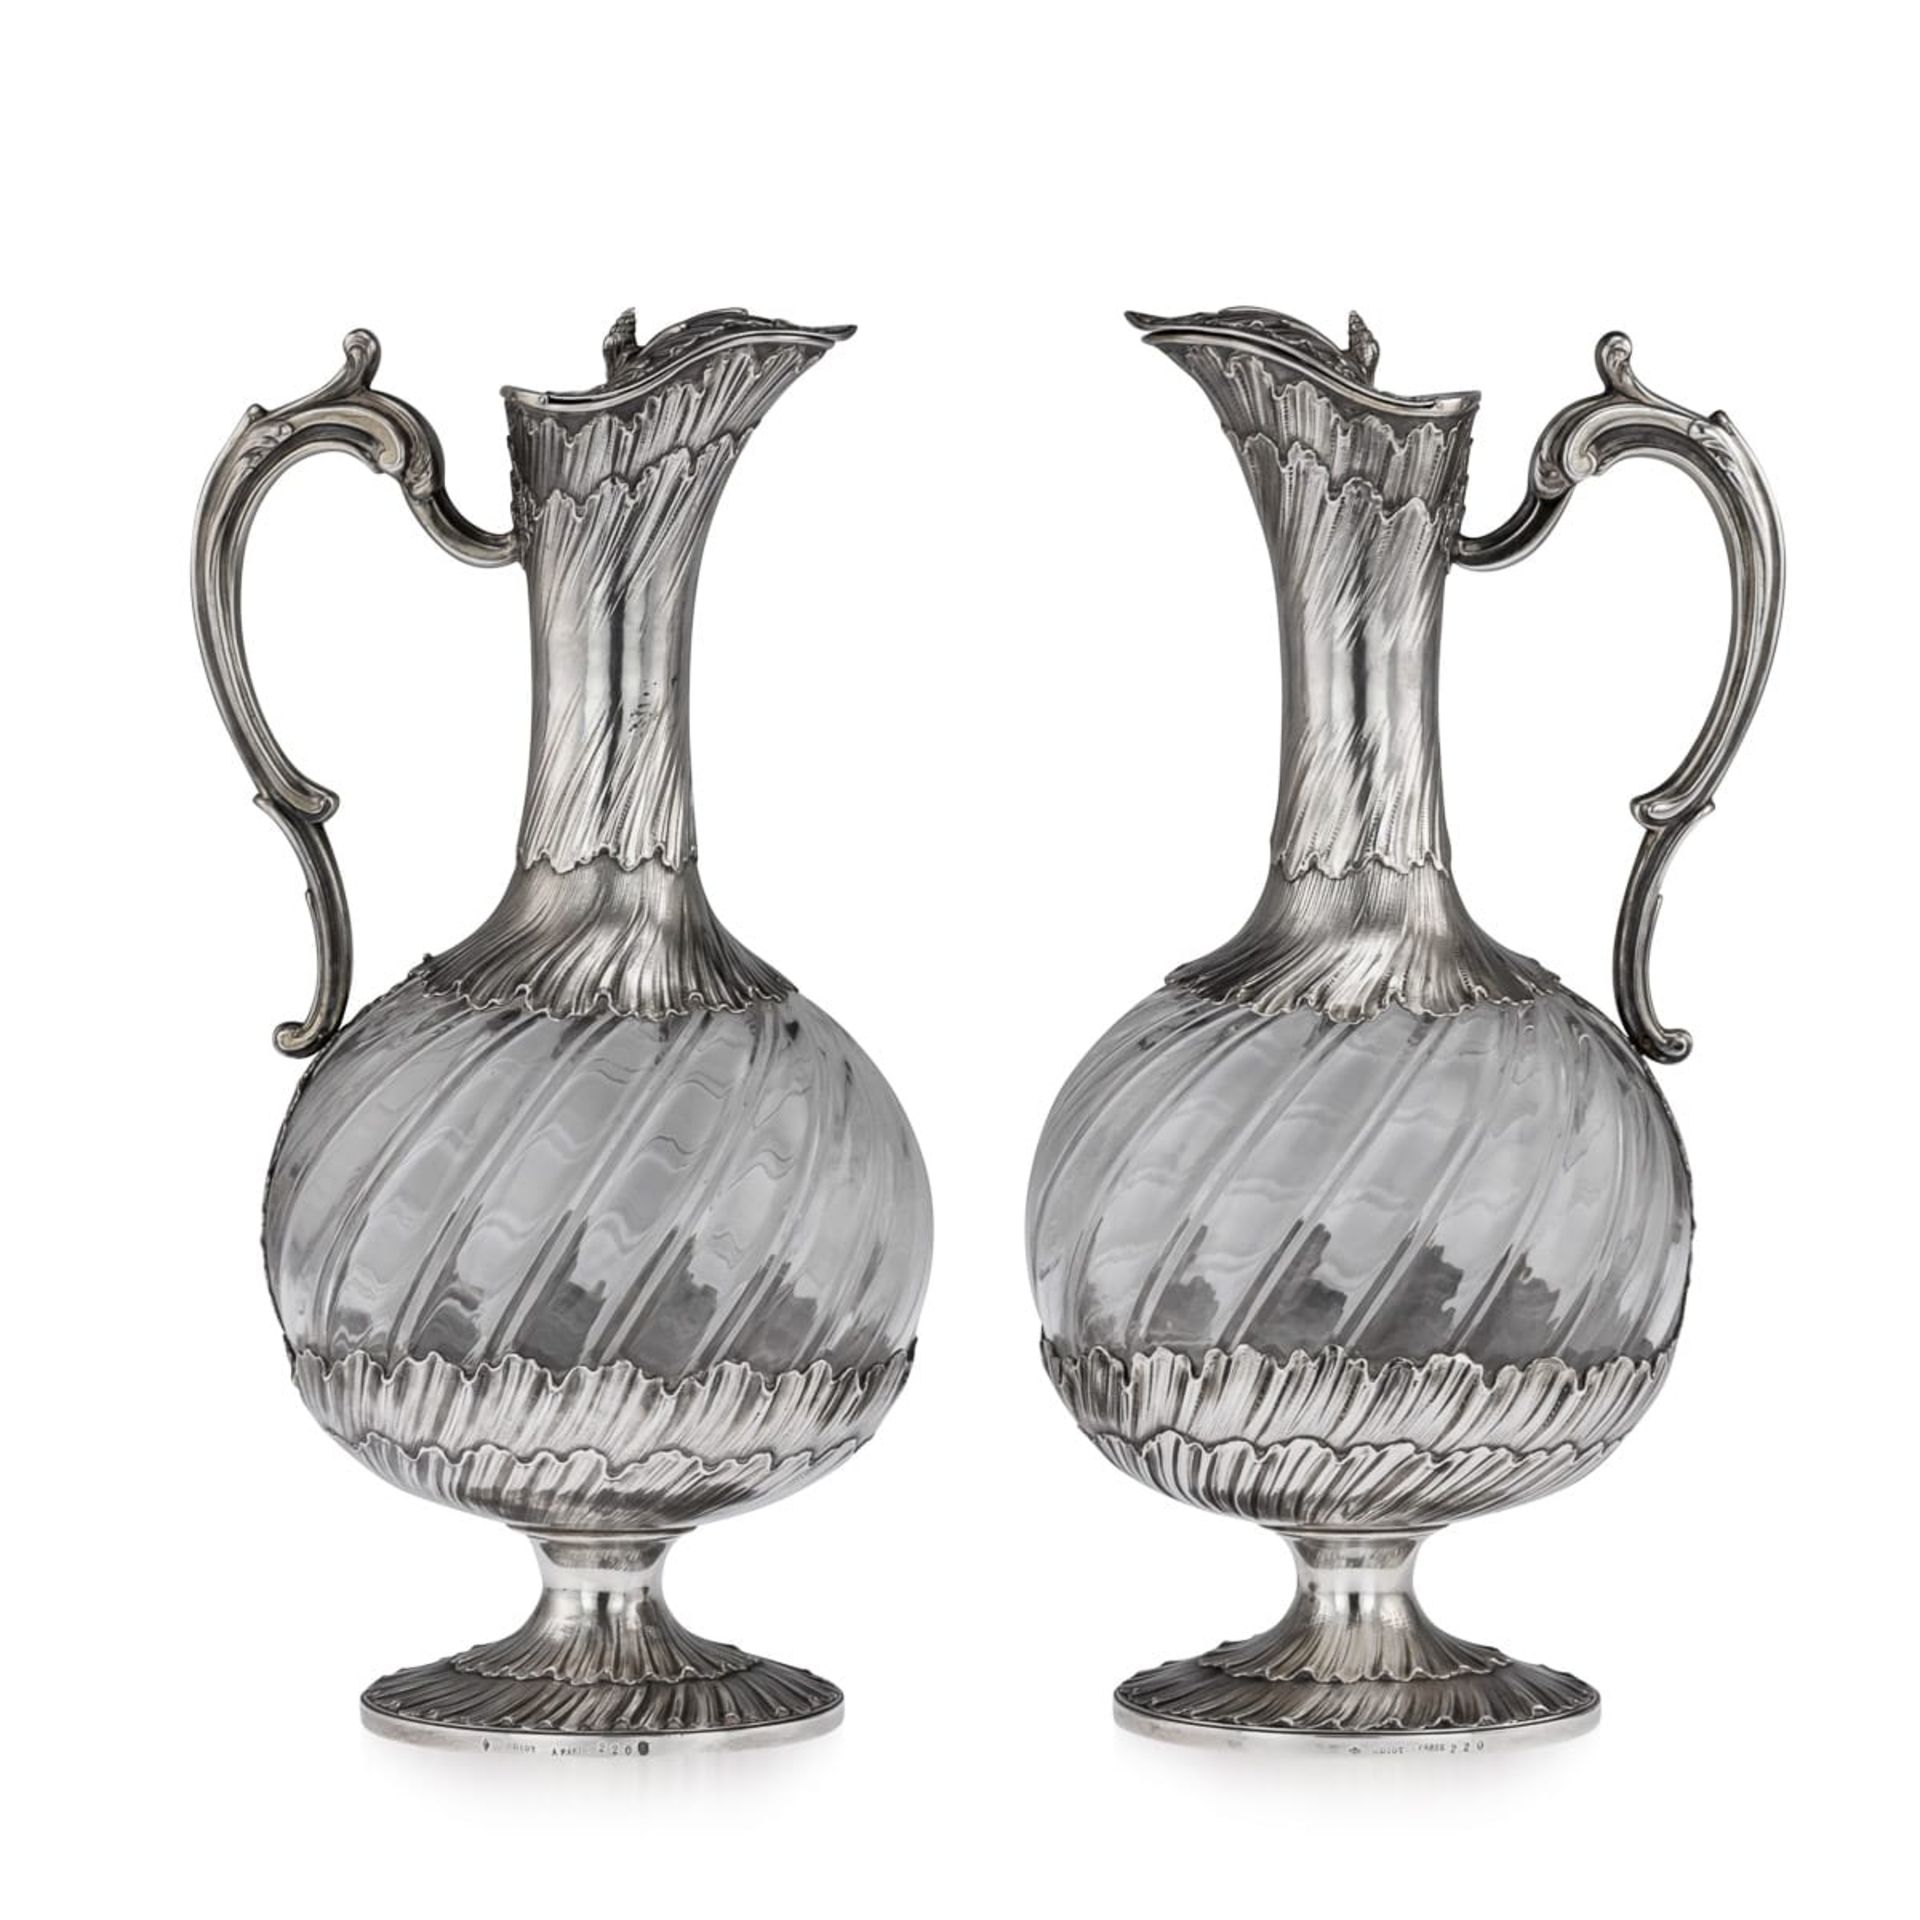 MAISON ODIOT: A PAIR OF 19TH CENTURY SILVER AND GLASS CLARET JUGS CIRCA 1890